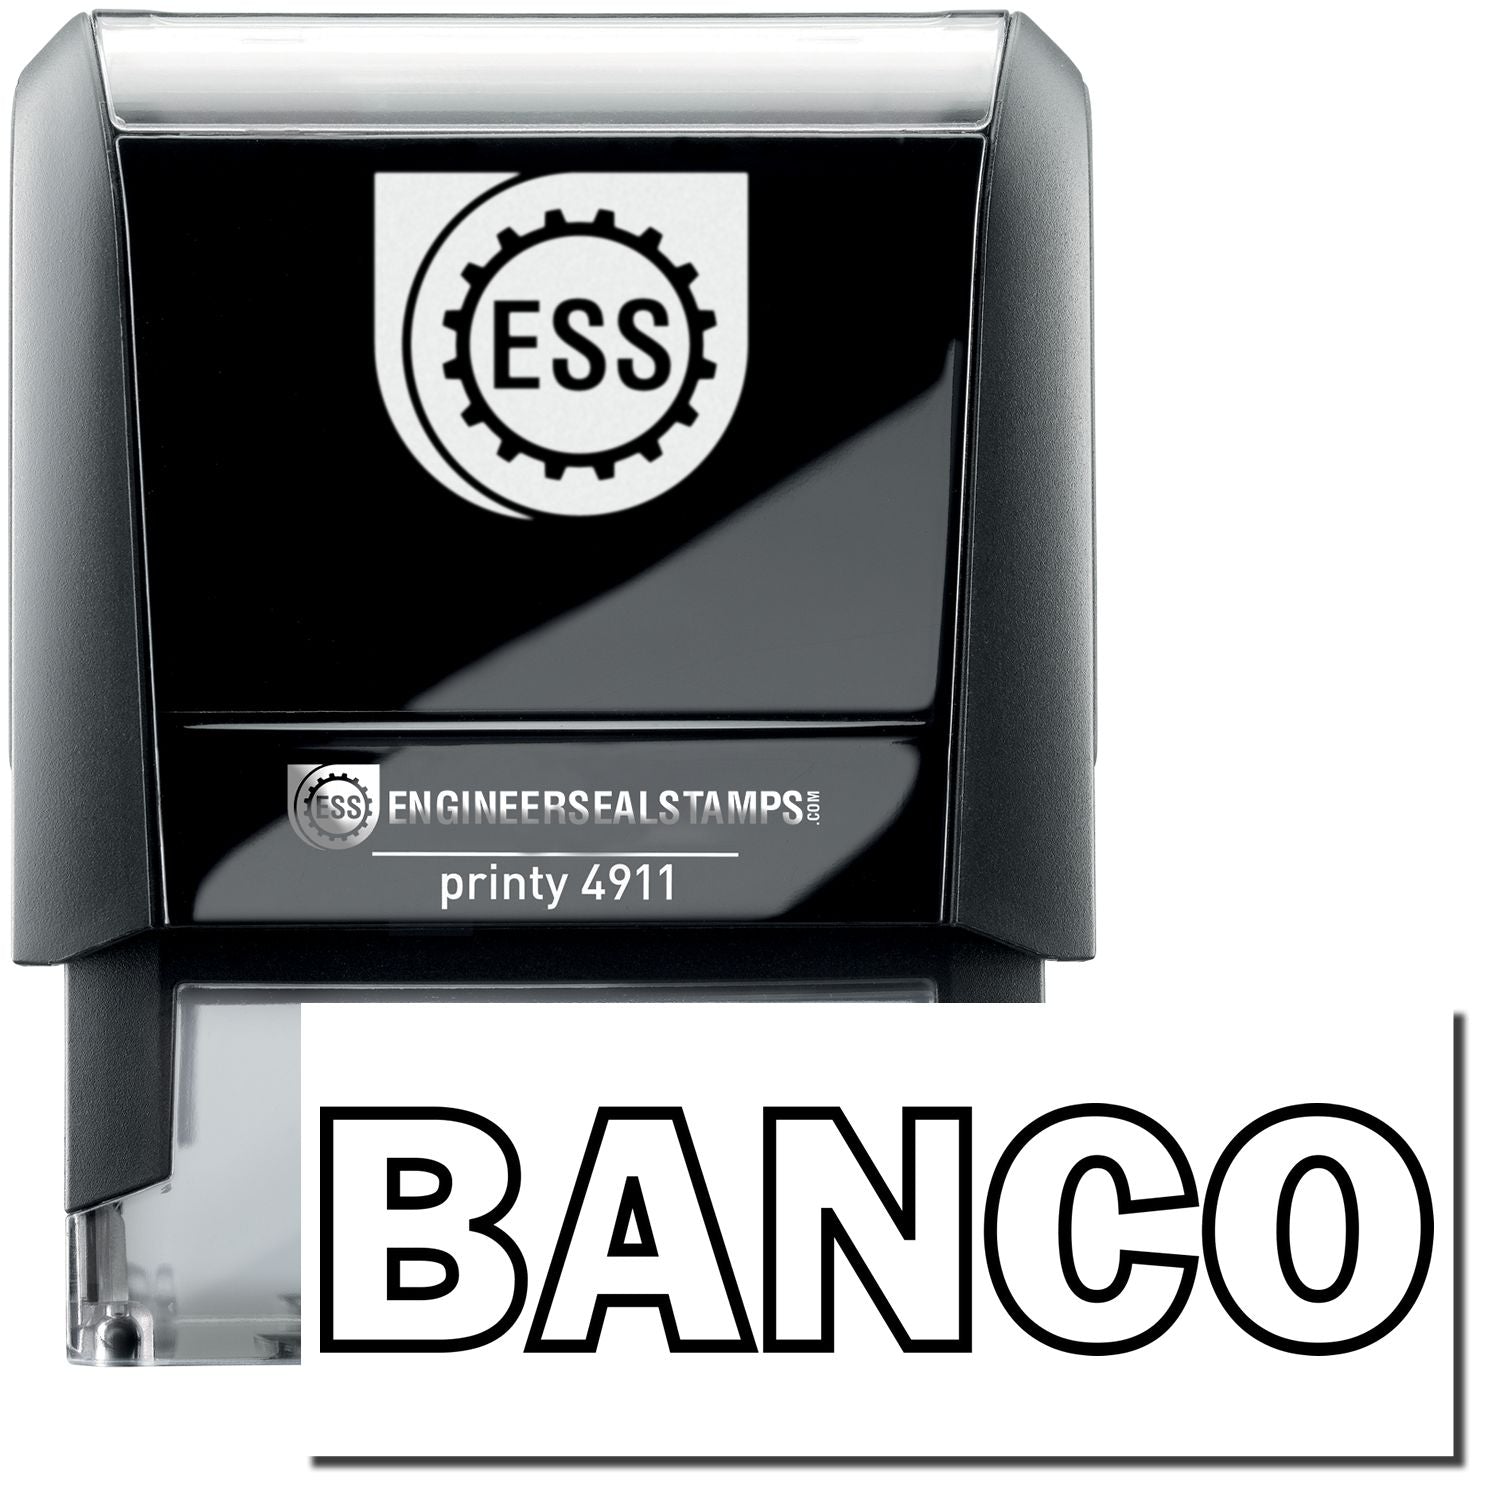 A self-inking stamp with a stamped image showing how the text "BANCO" in an outline style is displayed after stamping.